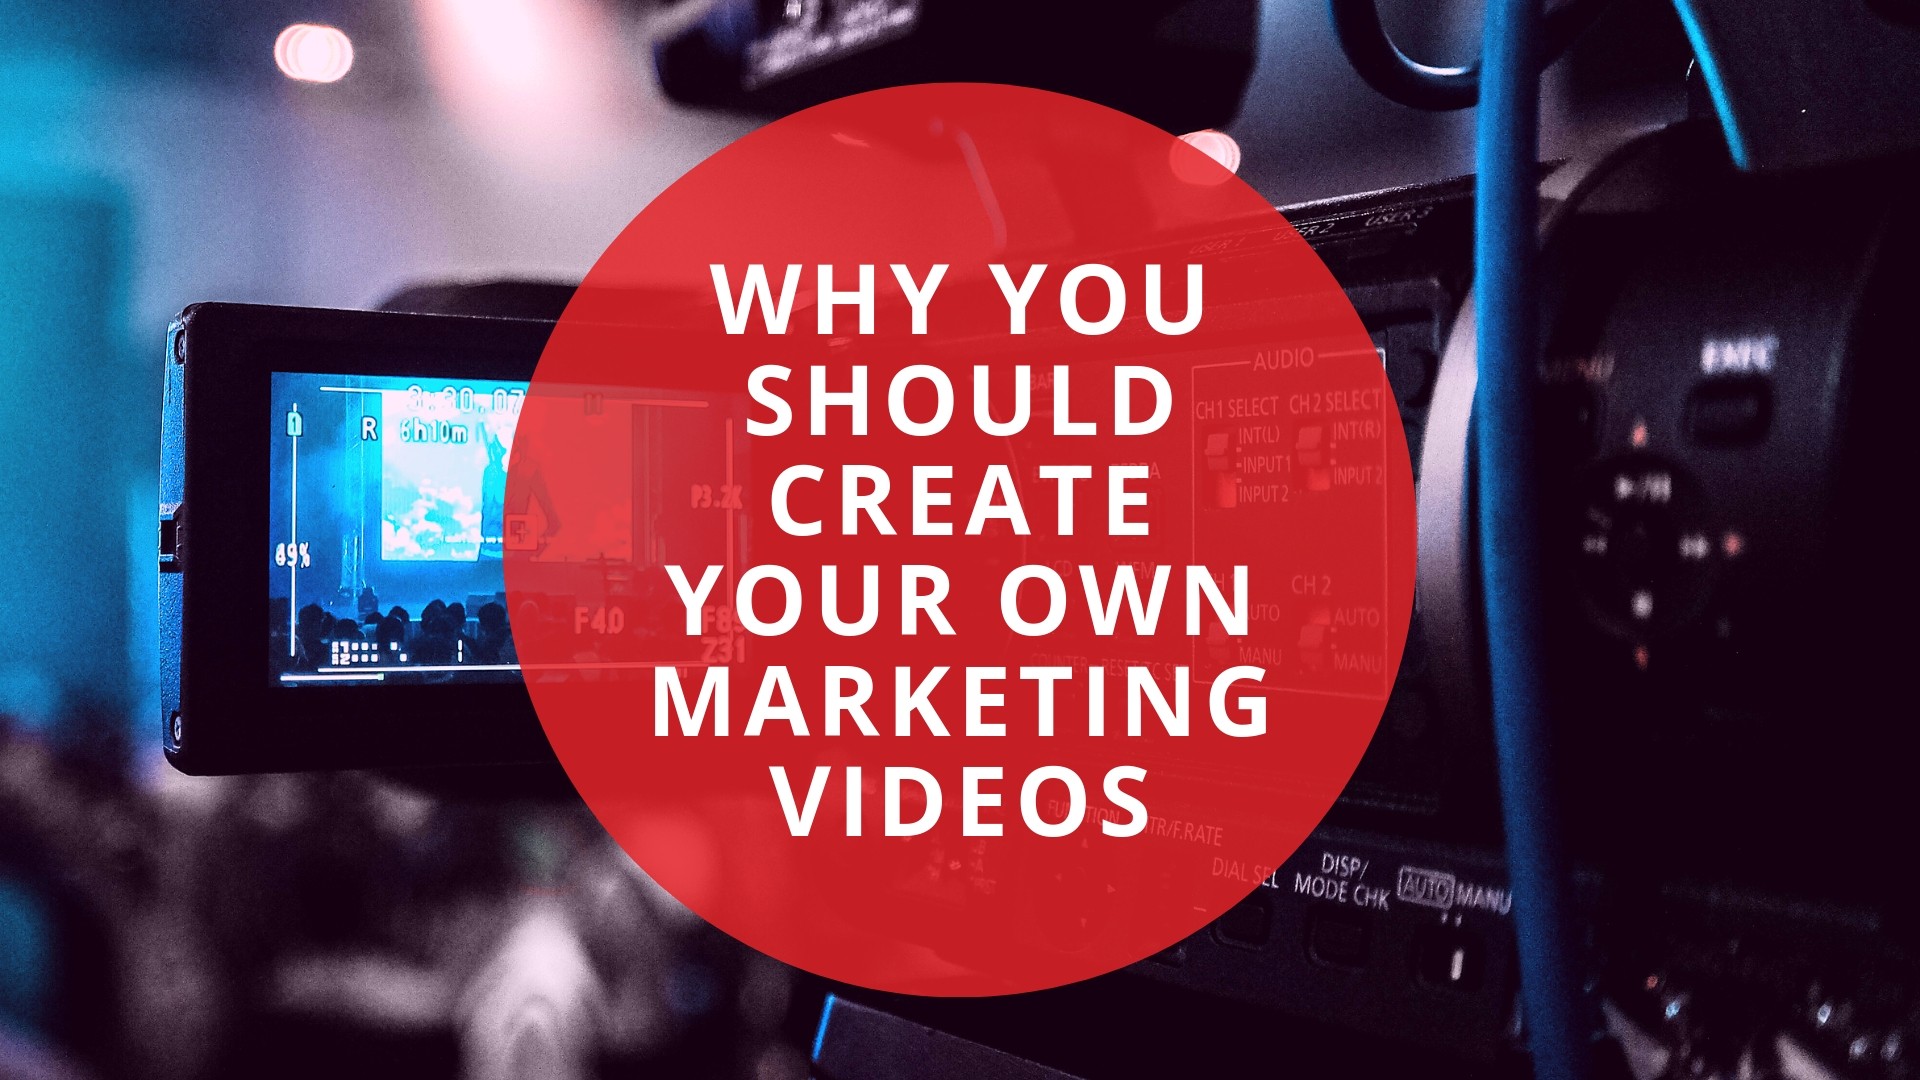 Make Your Own Marketing Videos